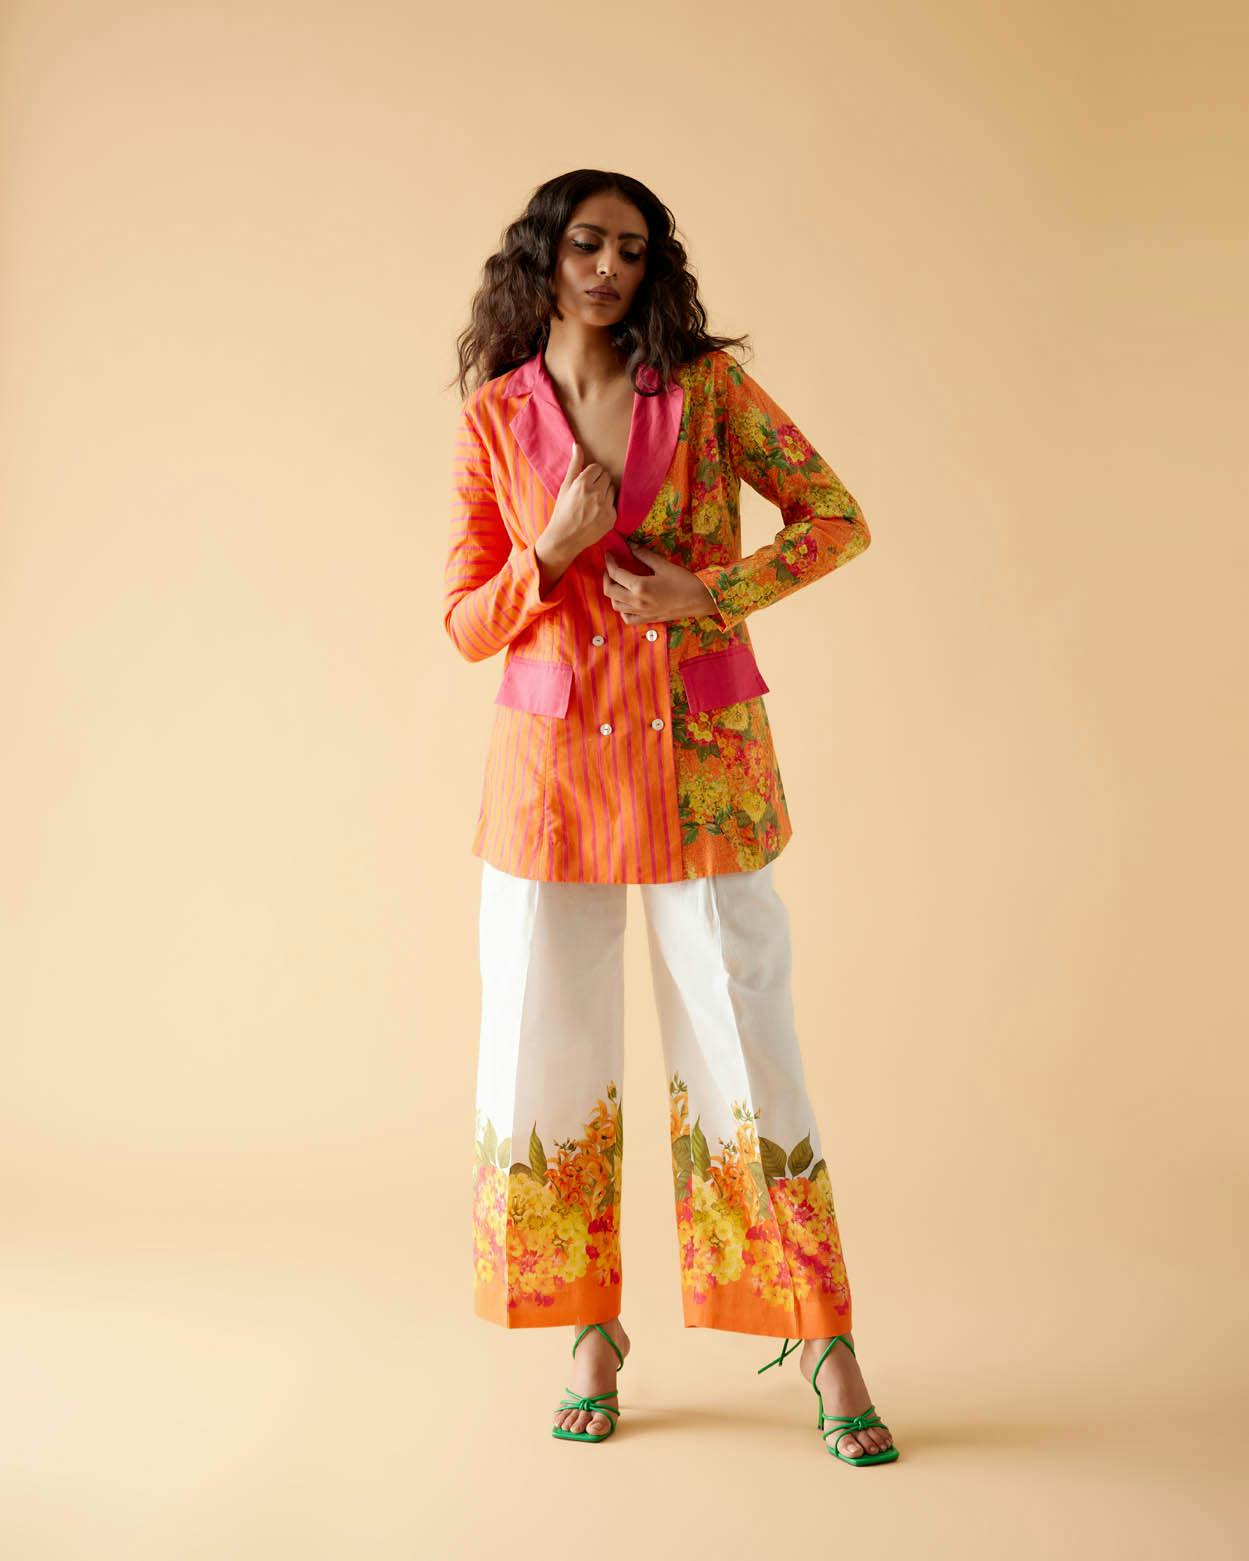 Palash Blazer, a product by Moh India